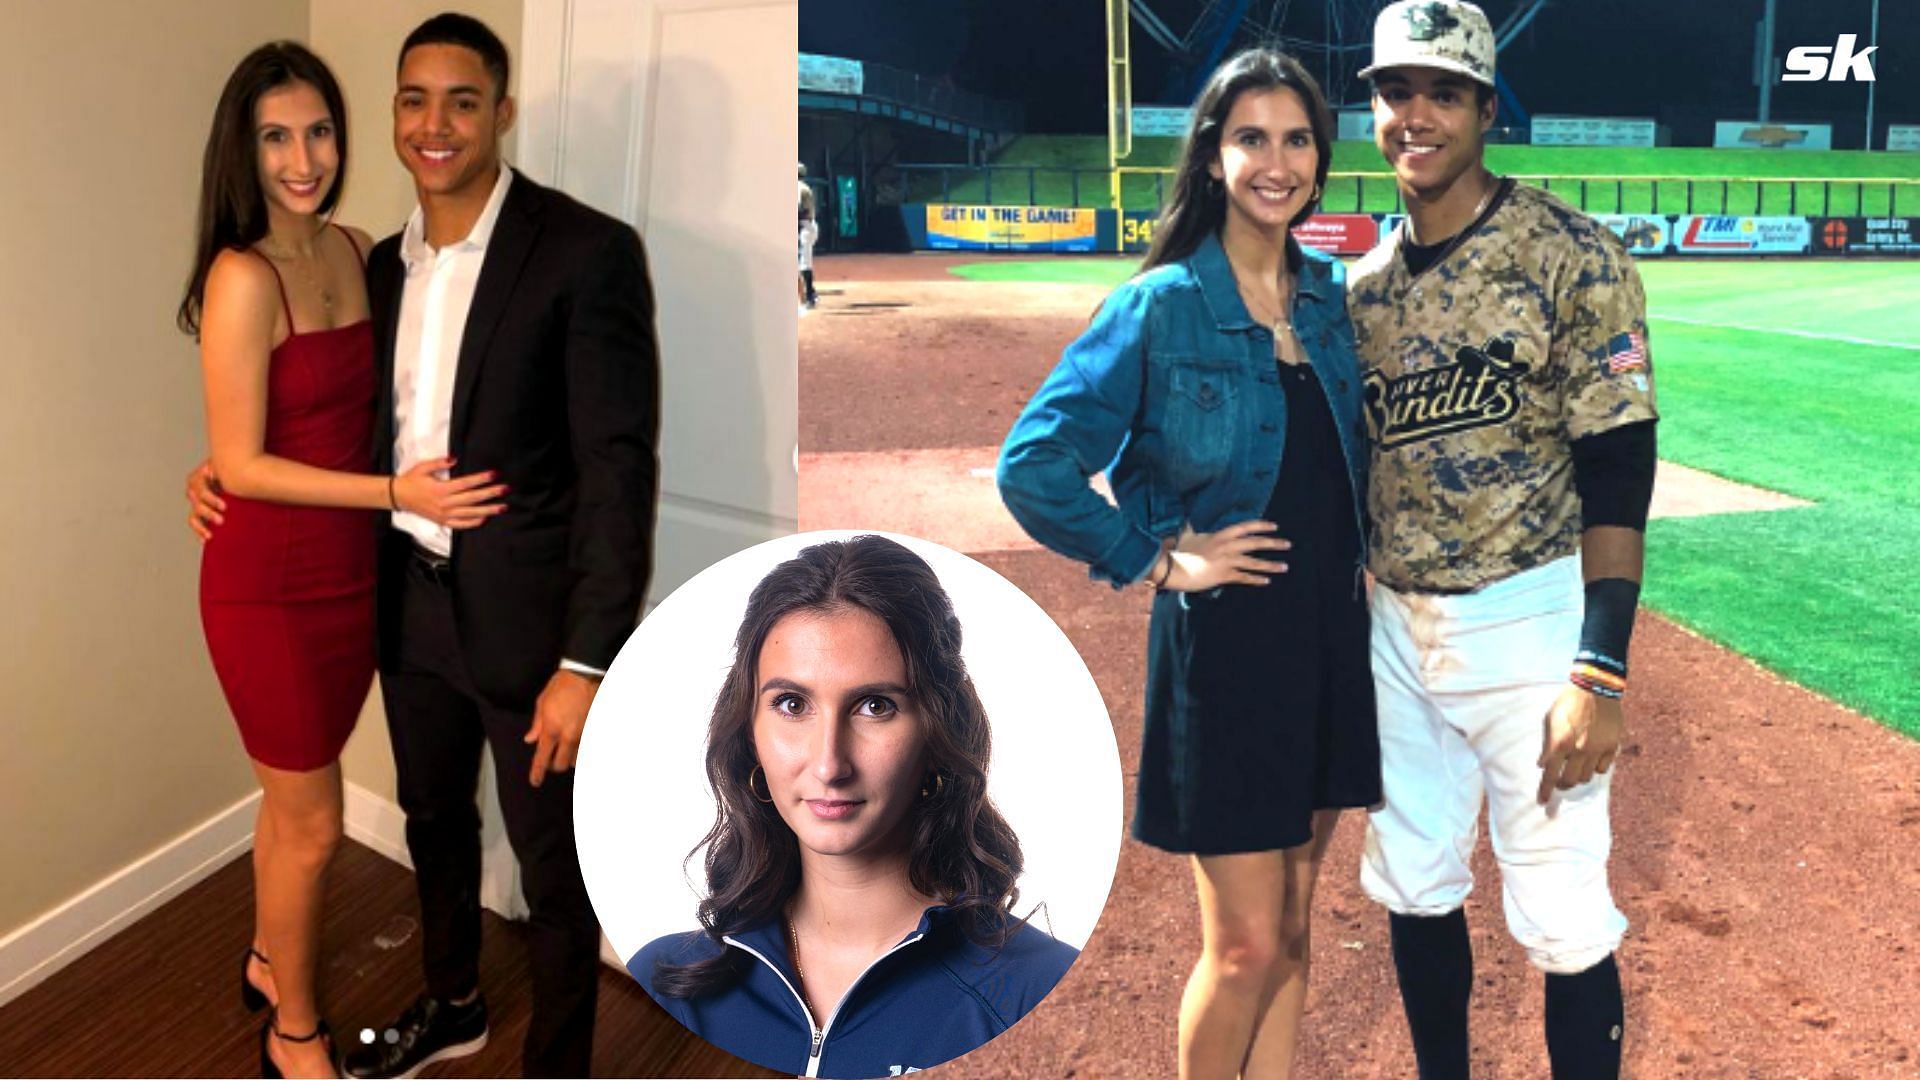 Jeremy Pena on his girlfriend in 2019: Glad I got to play in front of my  no. 1 fan this week